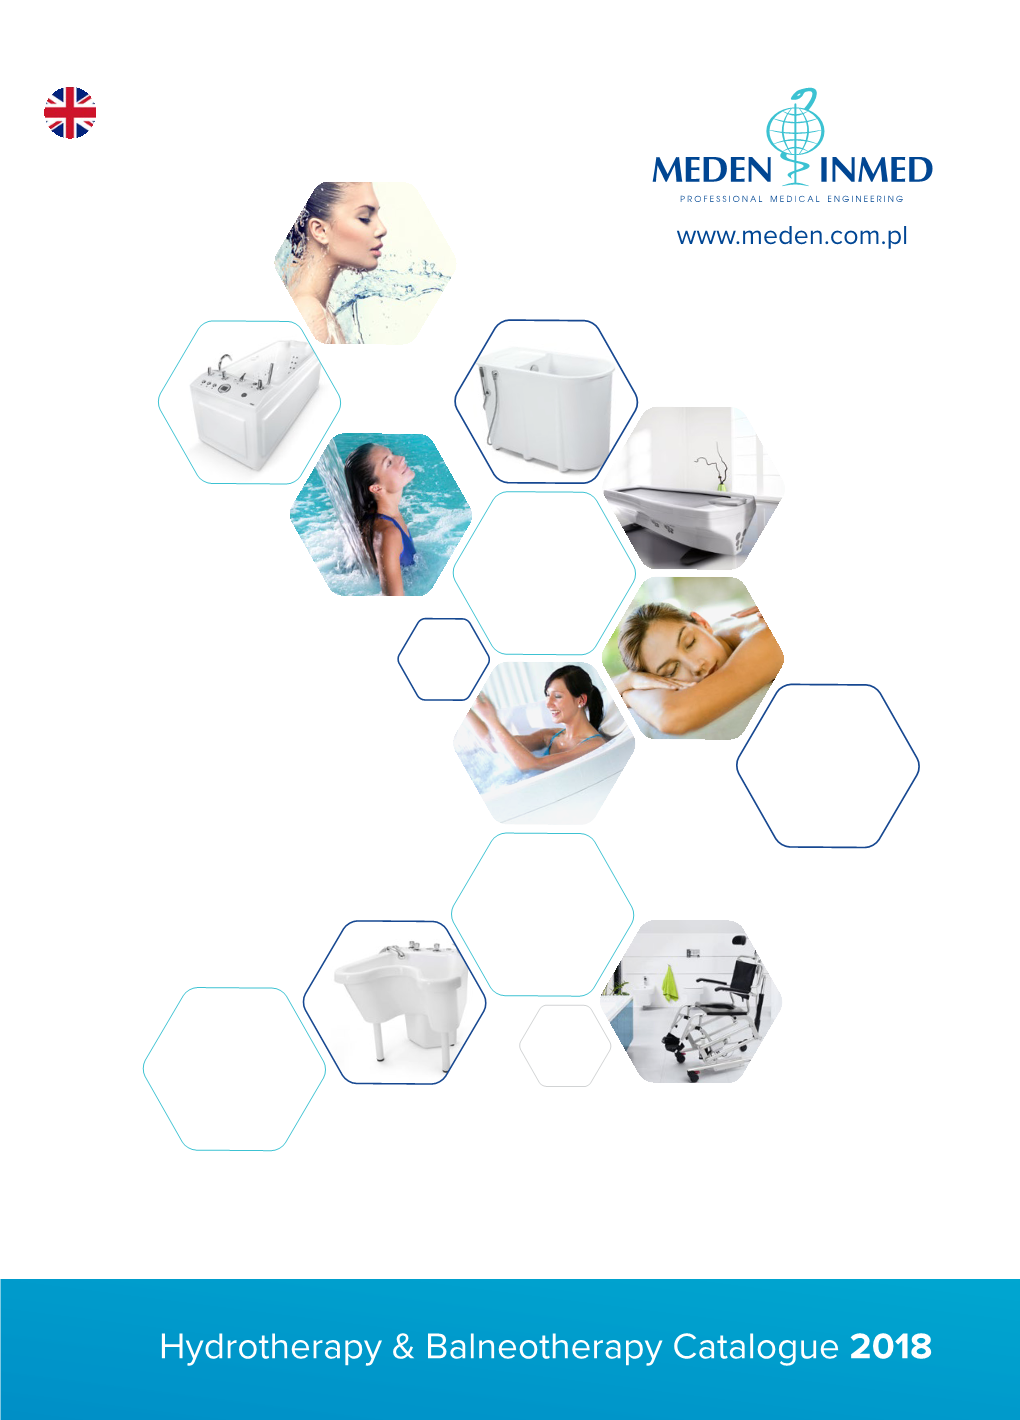 Hydrotherapy & Balneotherapy Catalogue 2018